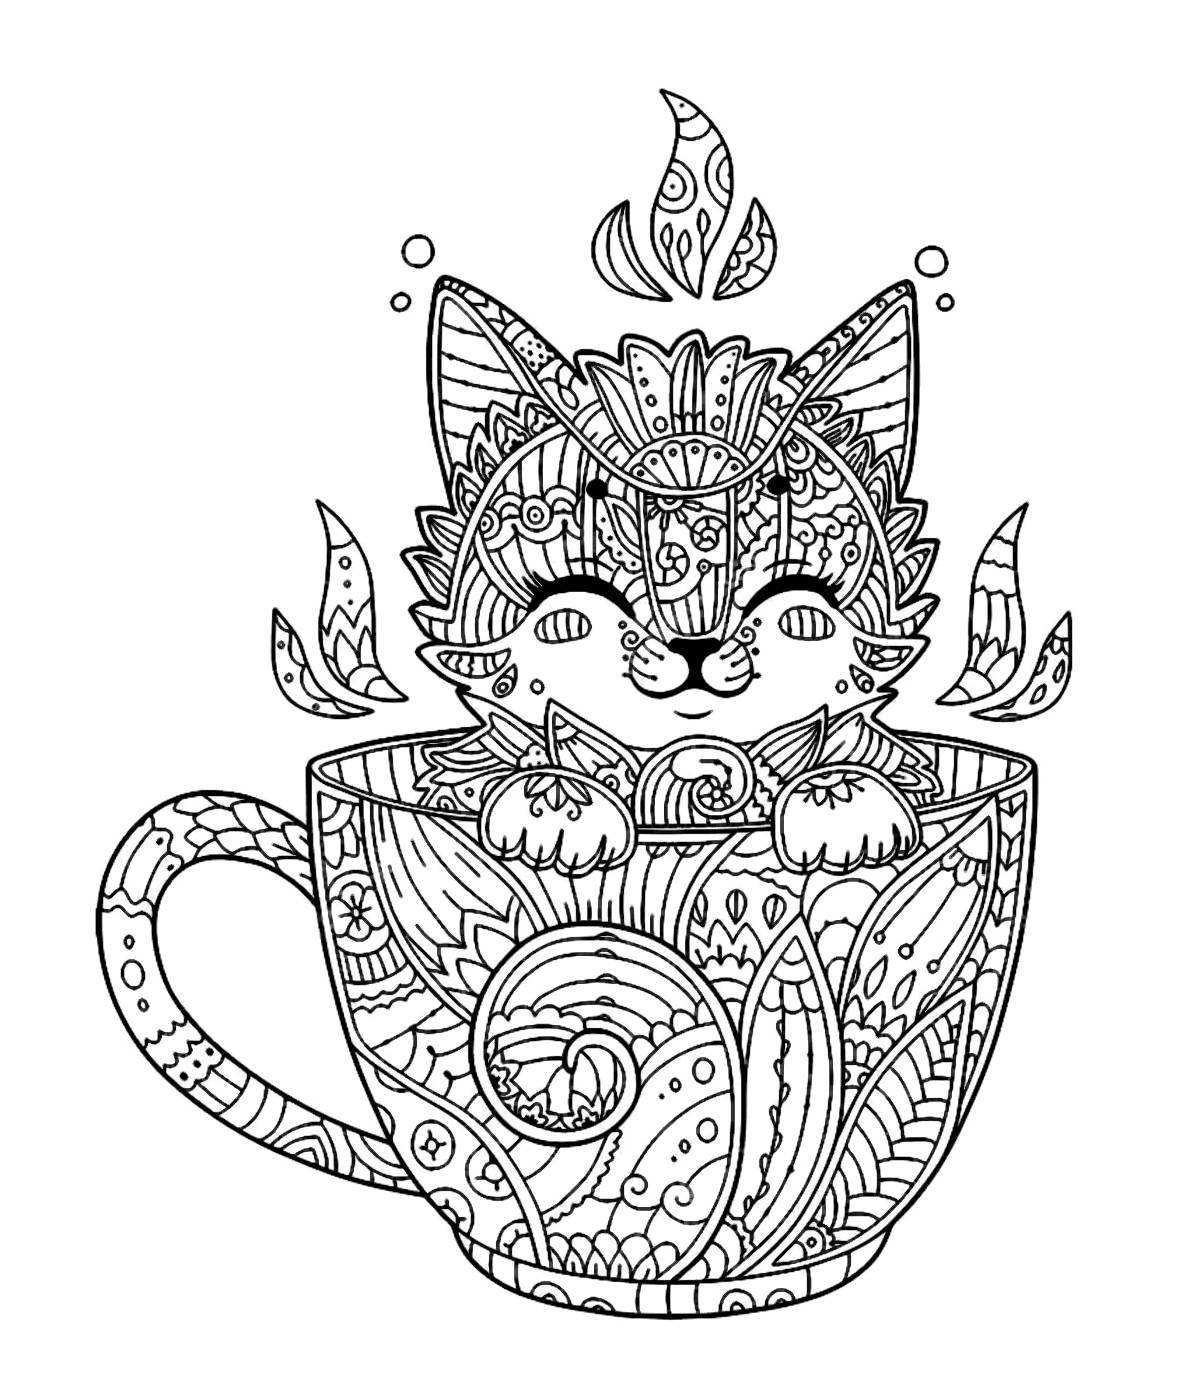 Adorable patterned cat coloring page